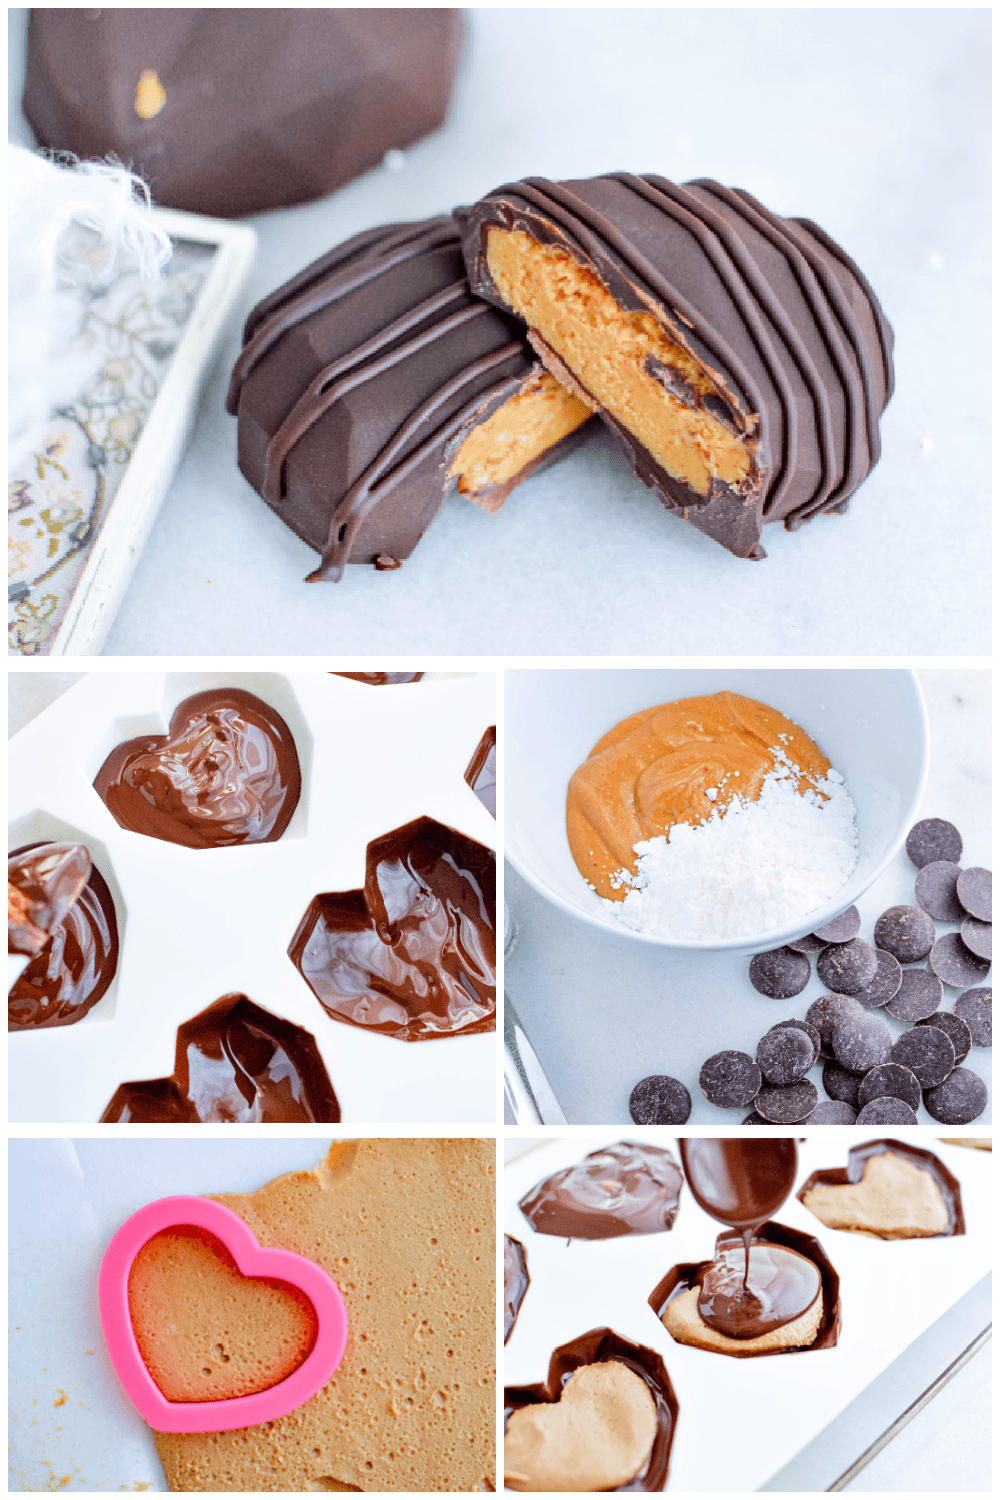 Let me show you how to make homemade chocolate peanut butter cups for your sweetheart. They're easier to make than you might think! via @jugglingactmama